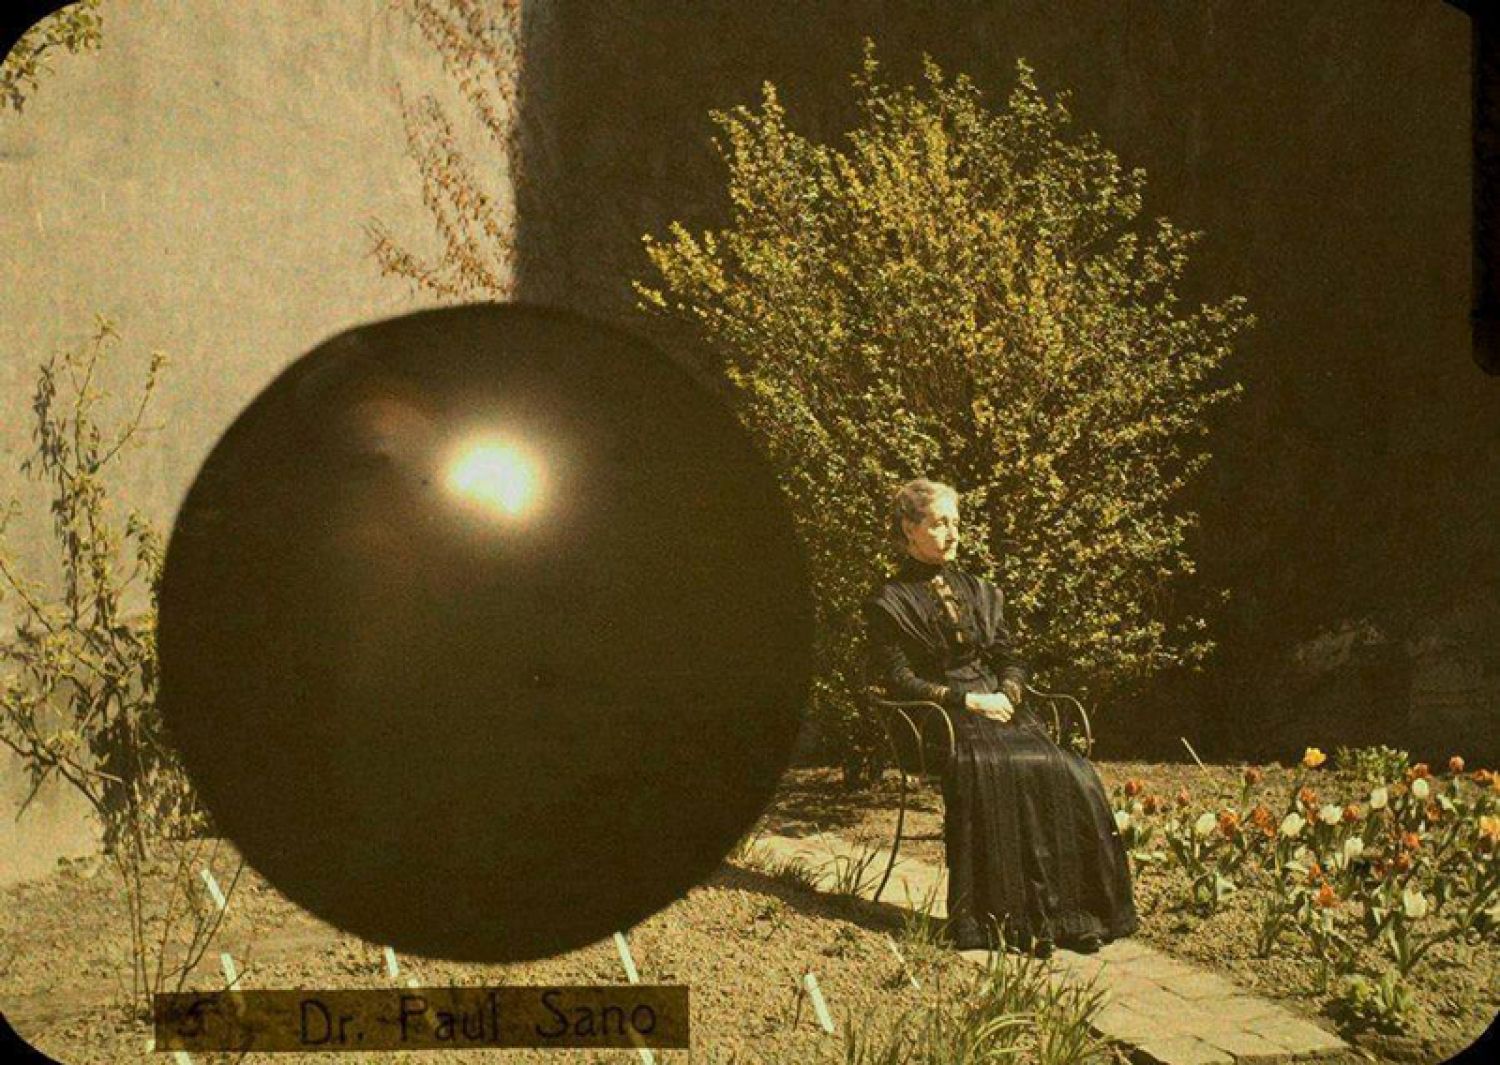 Paul Sano, «Lady and inset of solar eclipse», autochrome, 1910